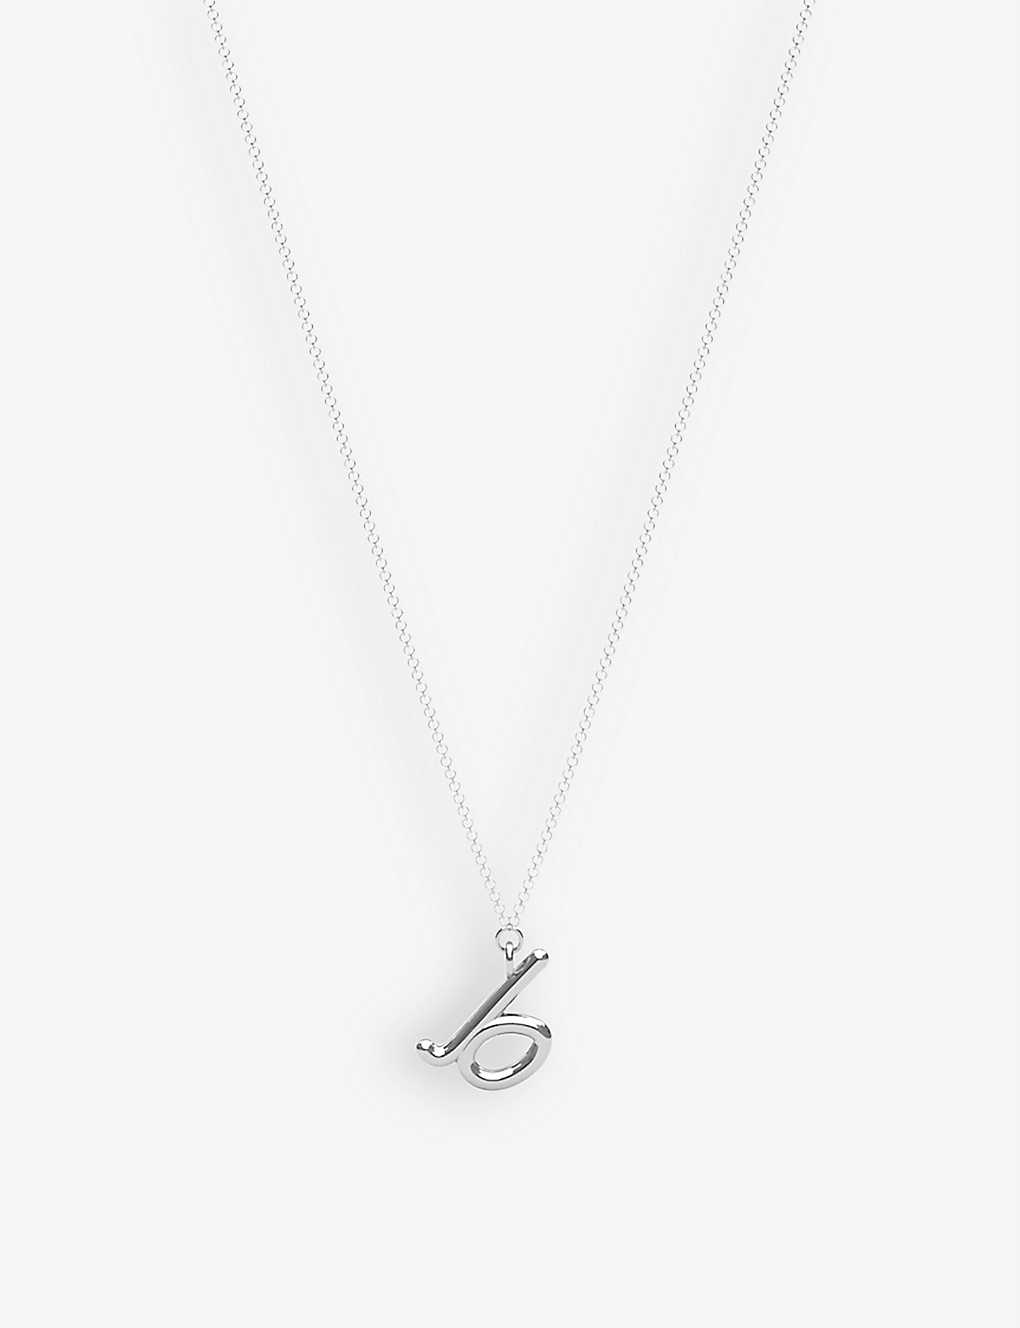 The Alkemistry Womens 18ct White Gold Love Letter B Initial 18ct White-gold Pendant Necklace